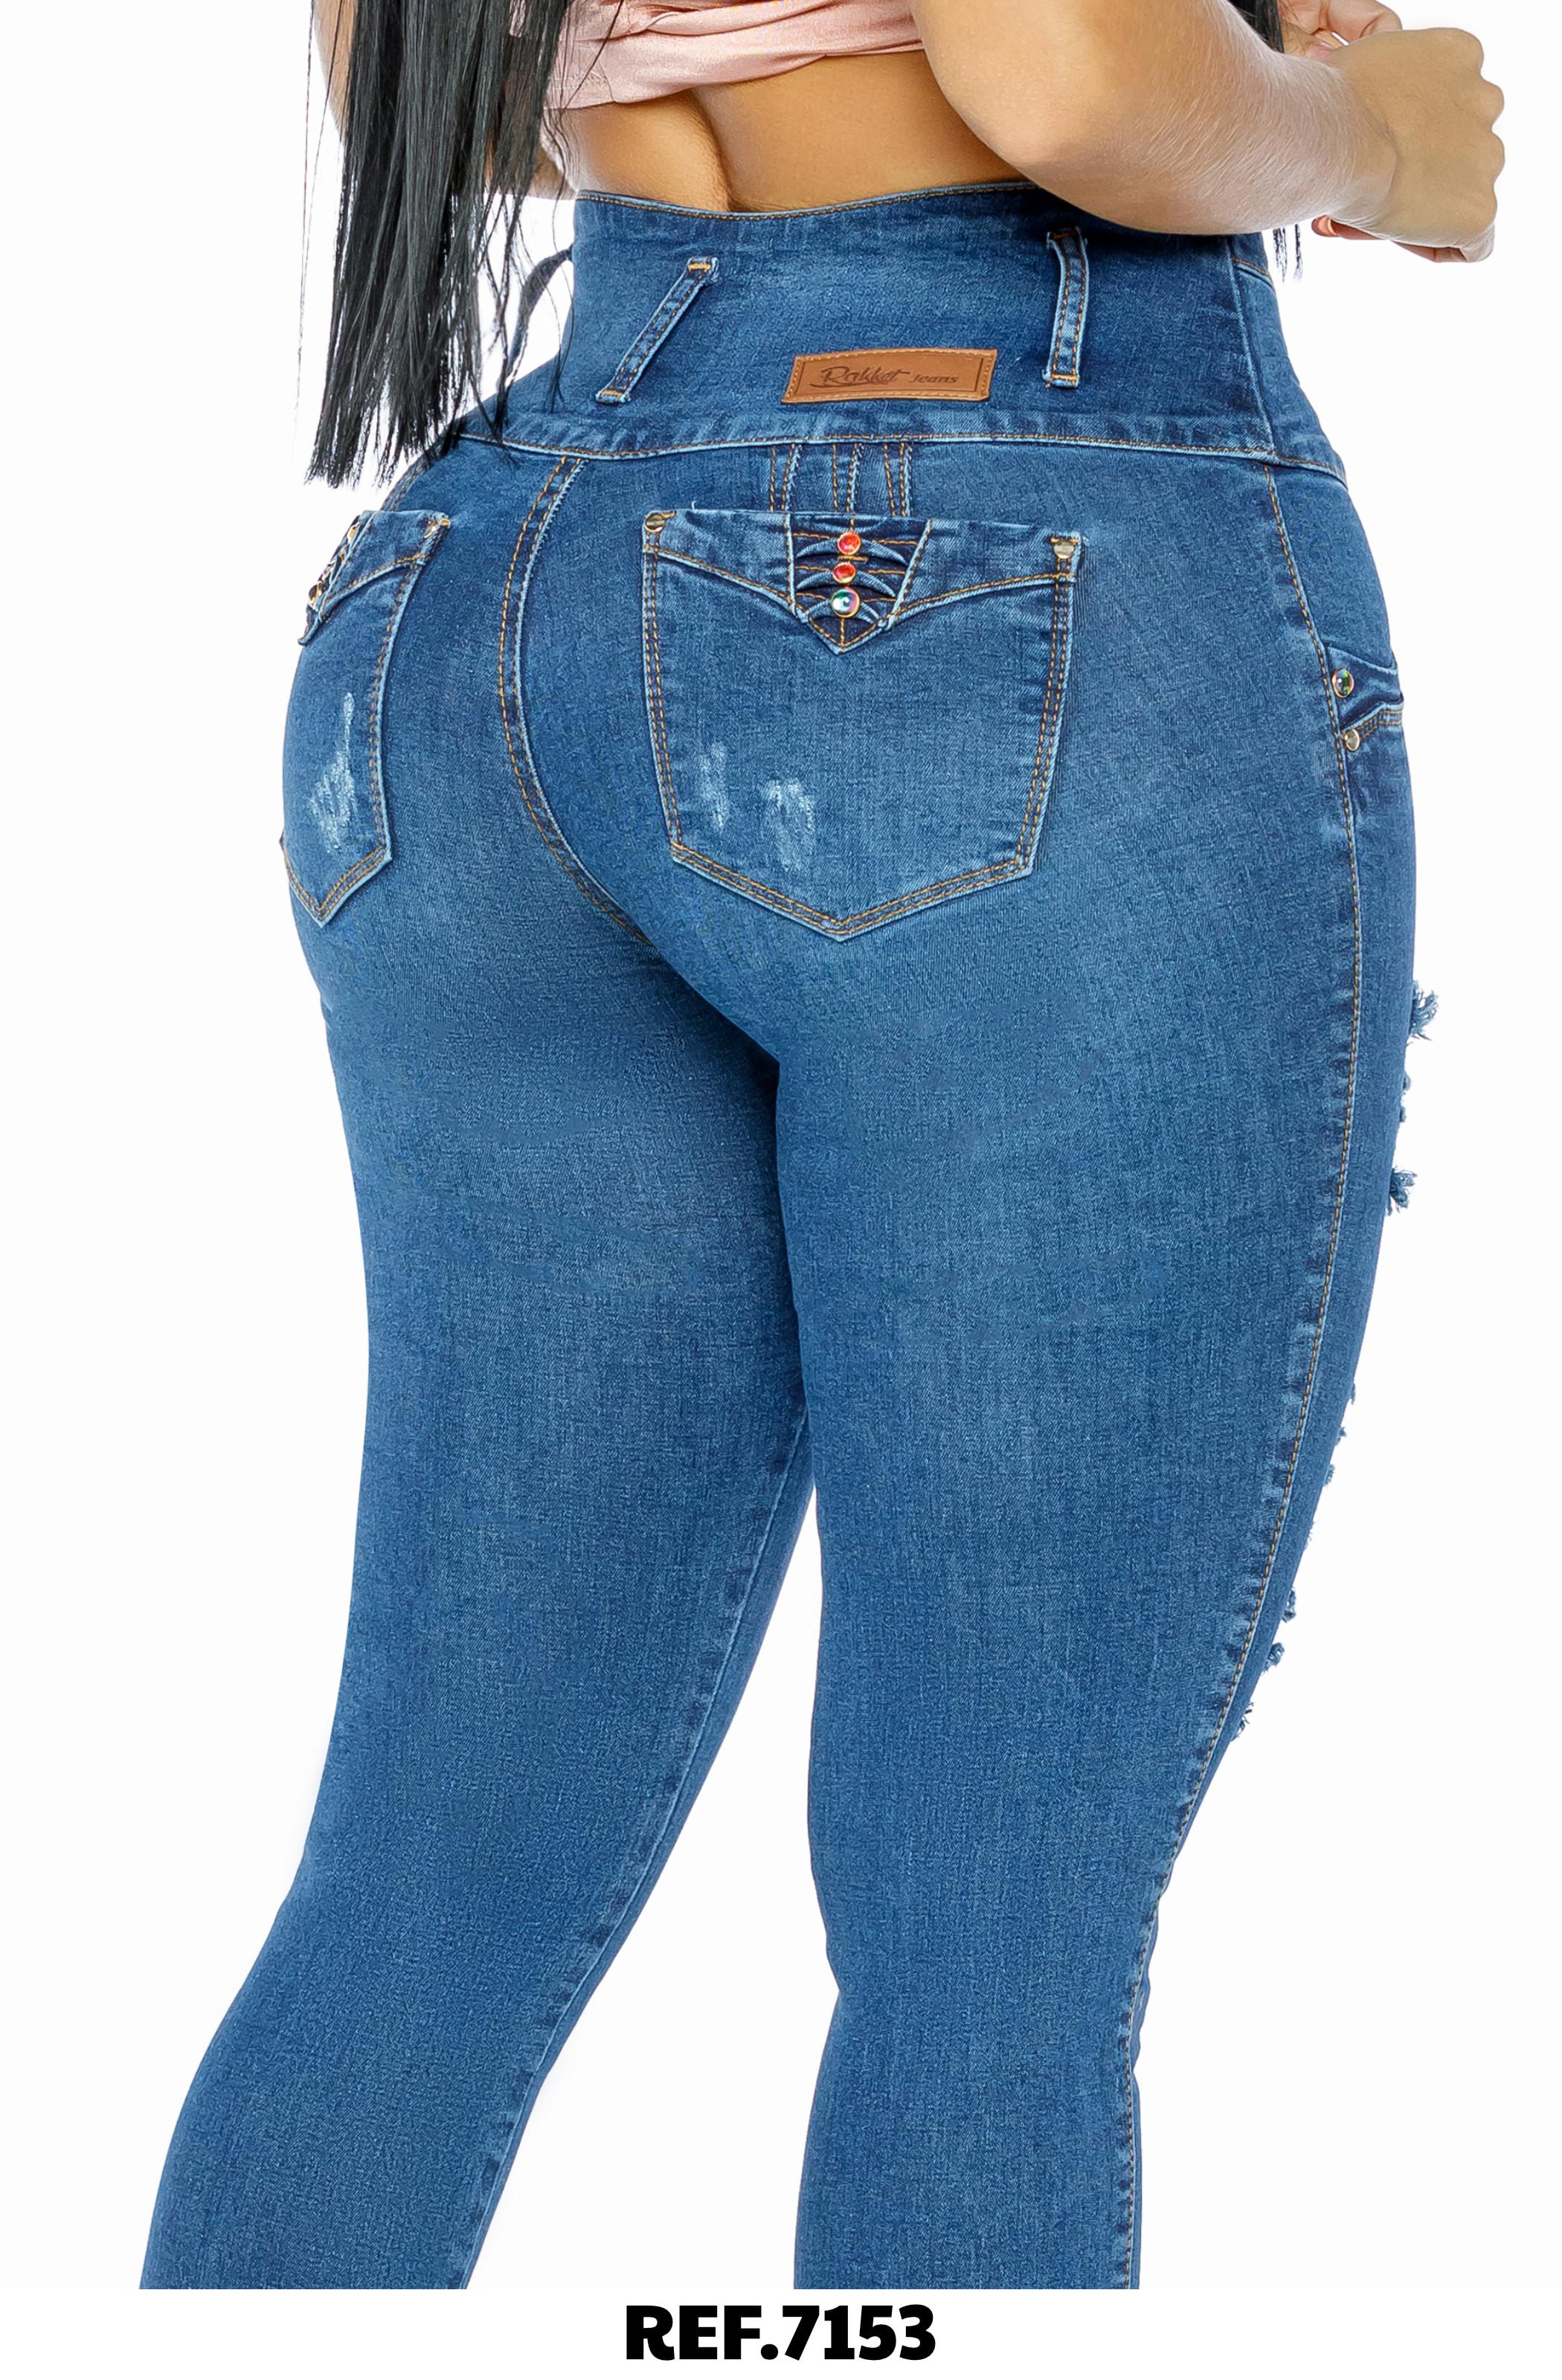 Jeans Colombianos Push Up